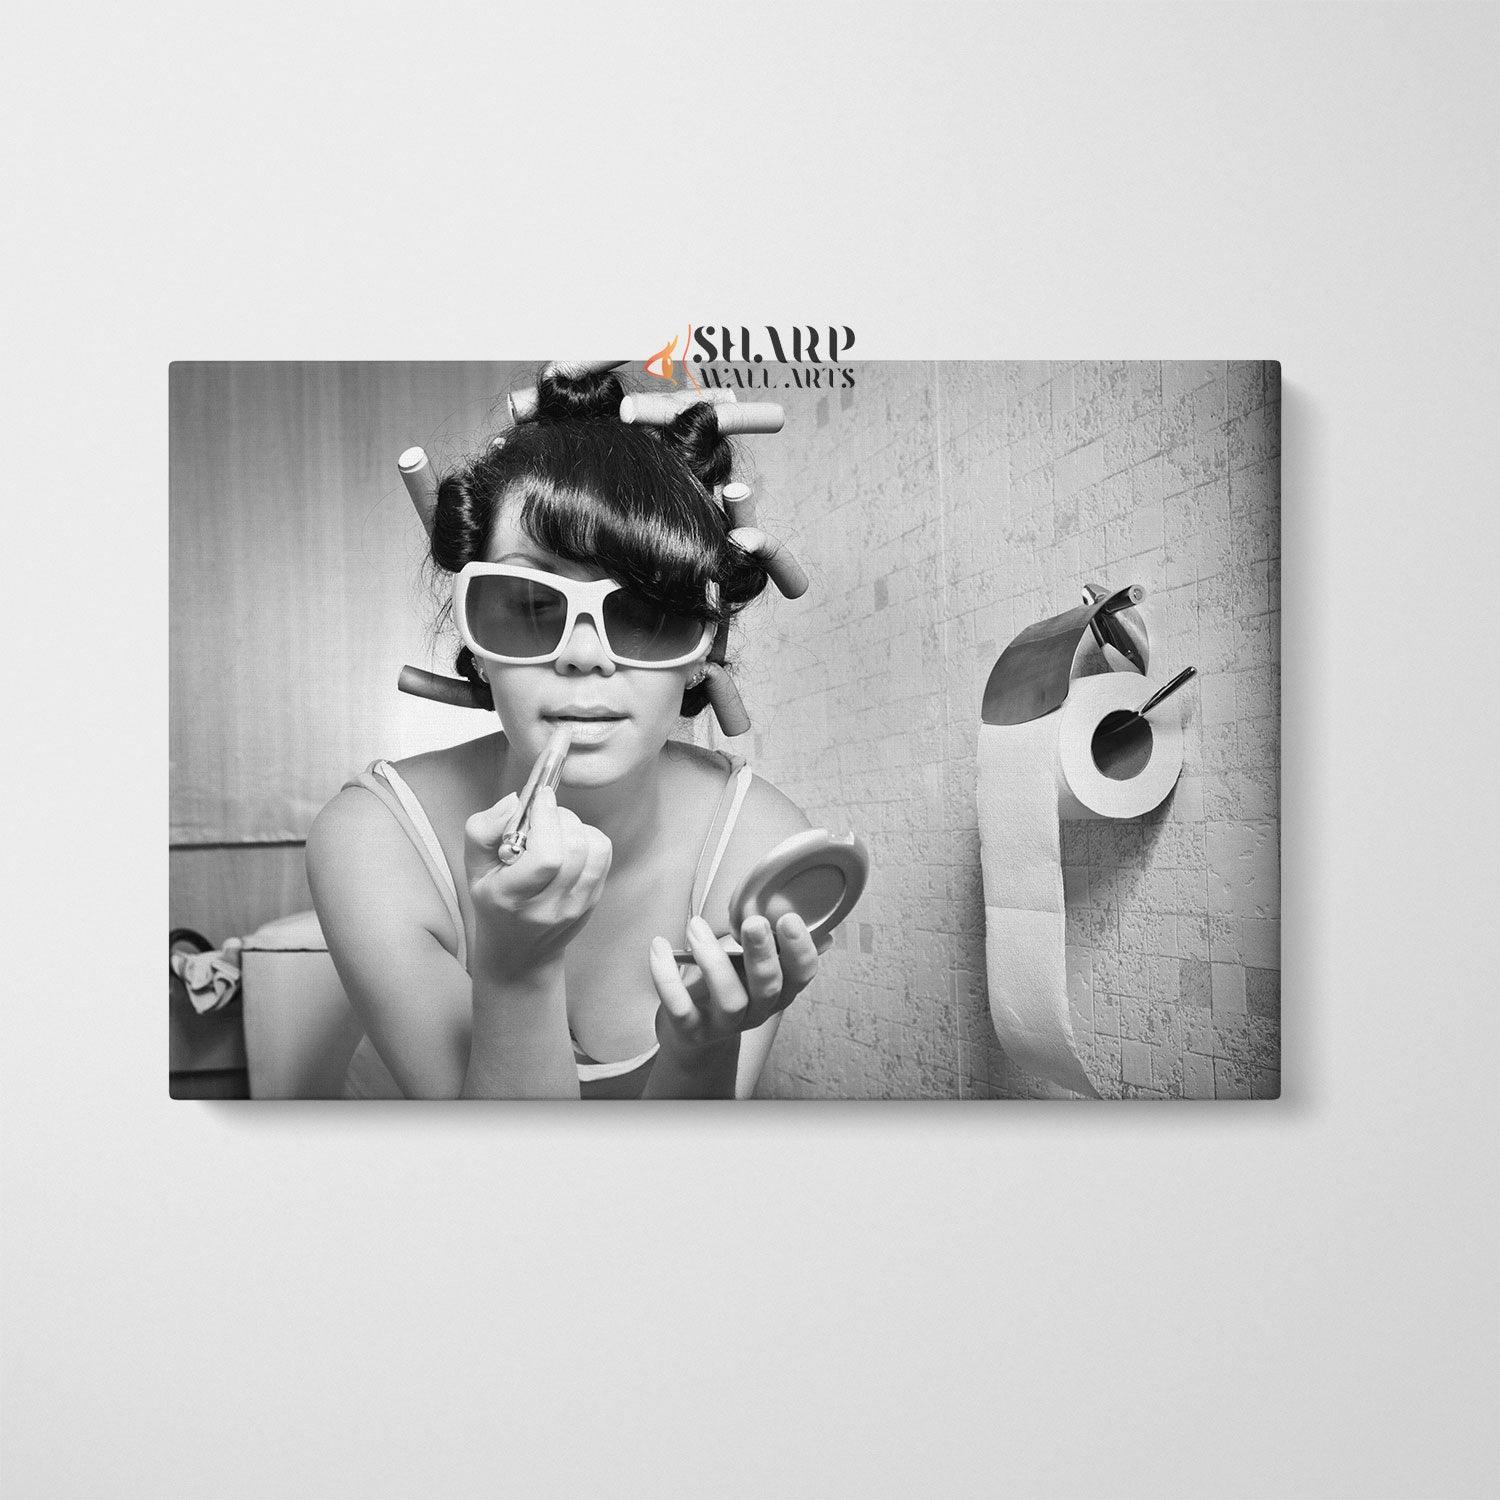 Poster Affiche Girl drinking on toilet WC noir et blanc wall art - A4  (21x29,7cm)